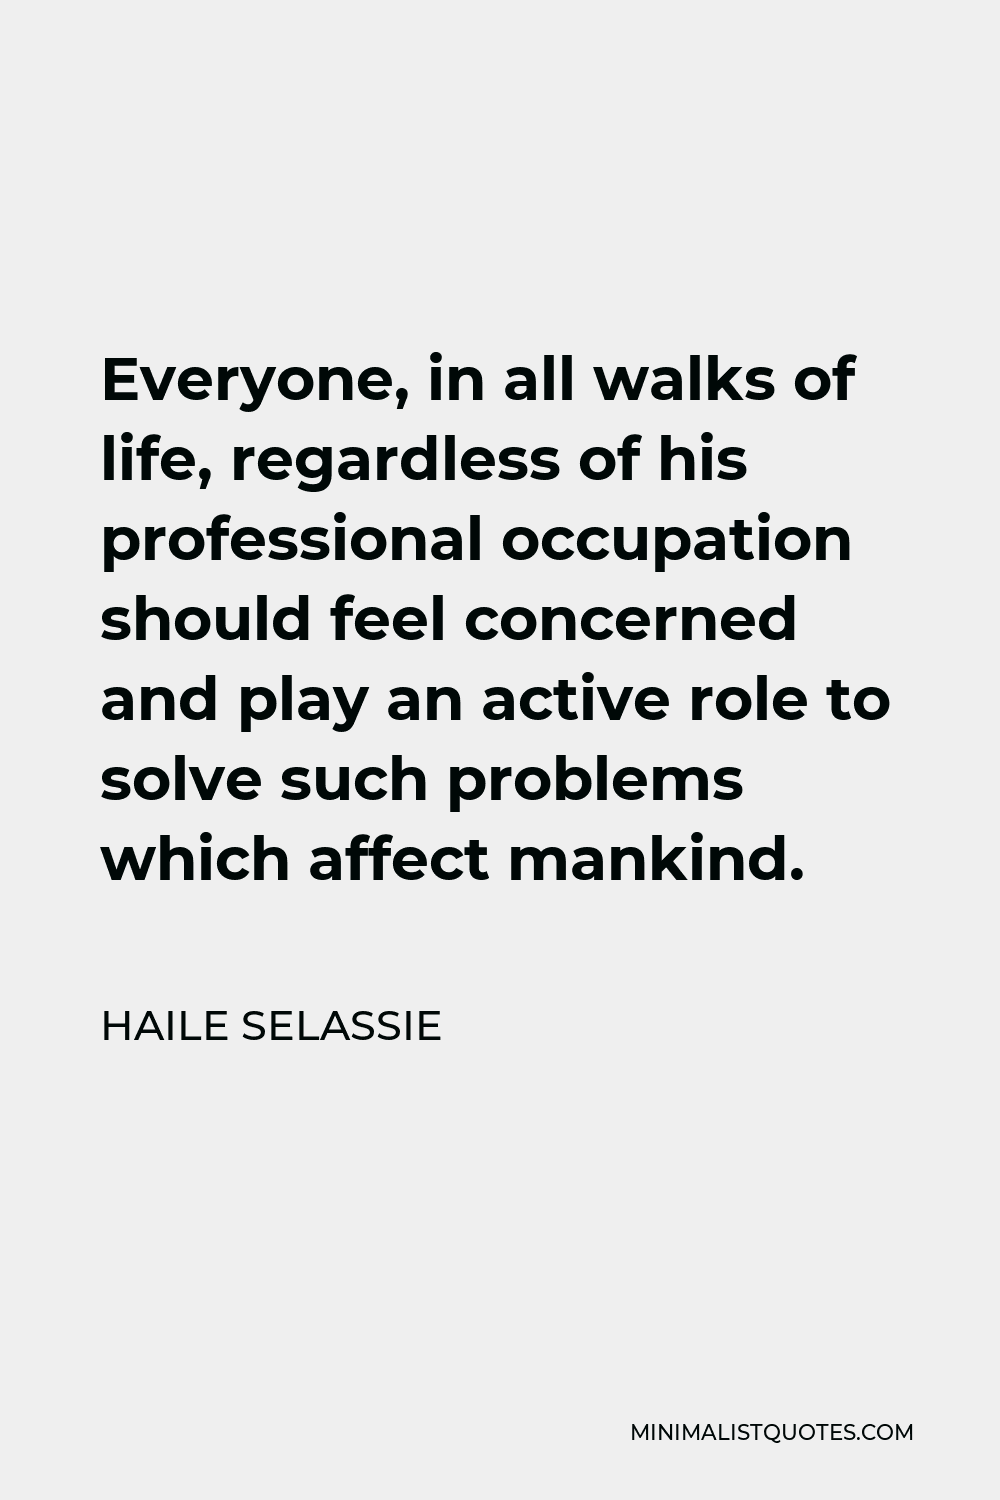 Haile Selassie Quote - Everyone, in all walks of life, regardless of his professional occupation should feel concerned and play an active role to solve such problems which affect mankind.